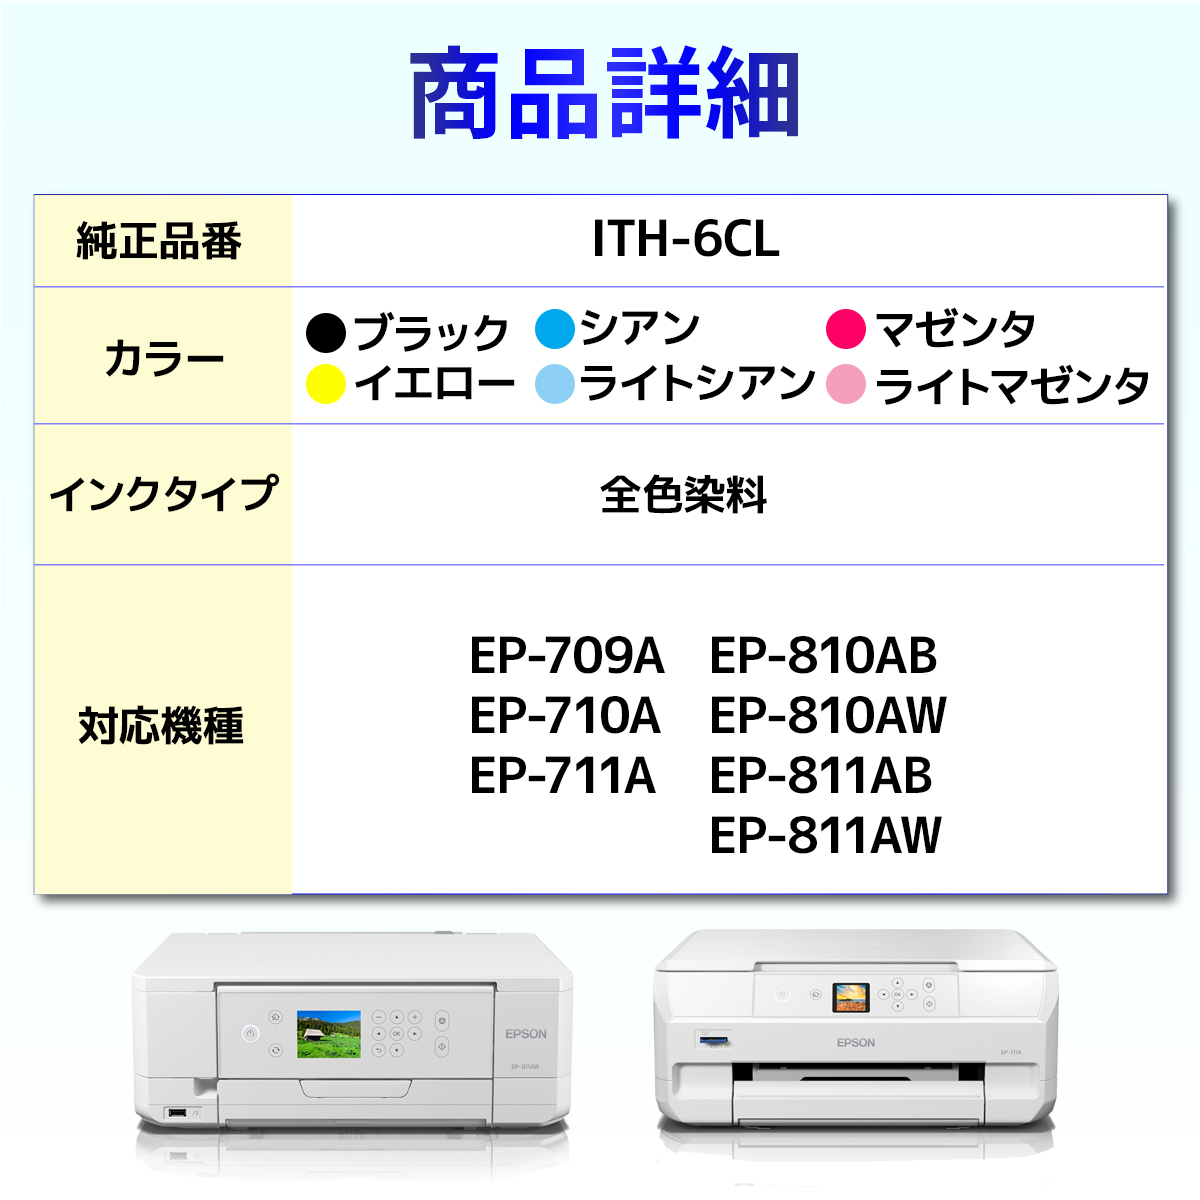 ITH-6CL ITH イチョウ 互換 インク EPSON エプソン １４個 EP-709A EP-710A EP-711A EP-810AB EP-810AW EP-811AB EP-811AW｜baustore｜03